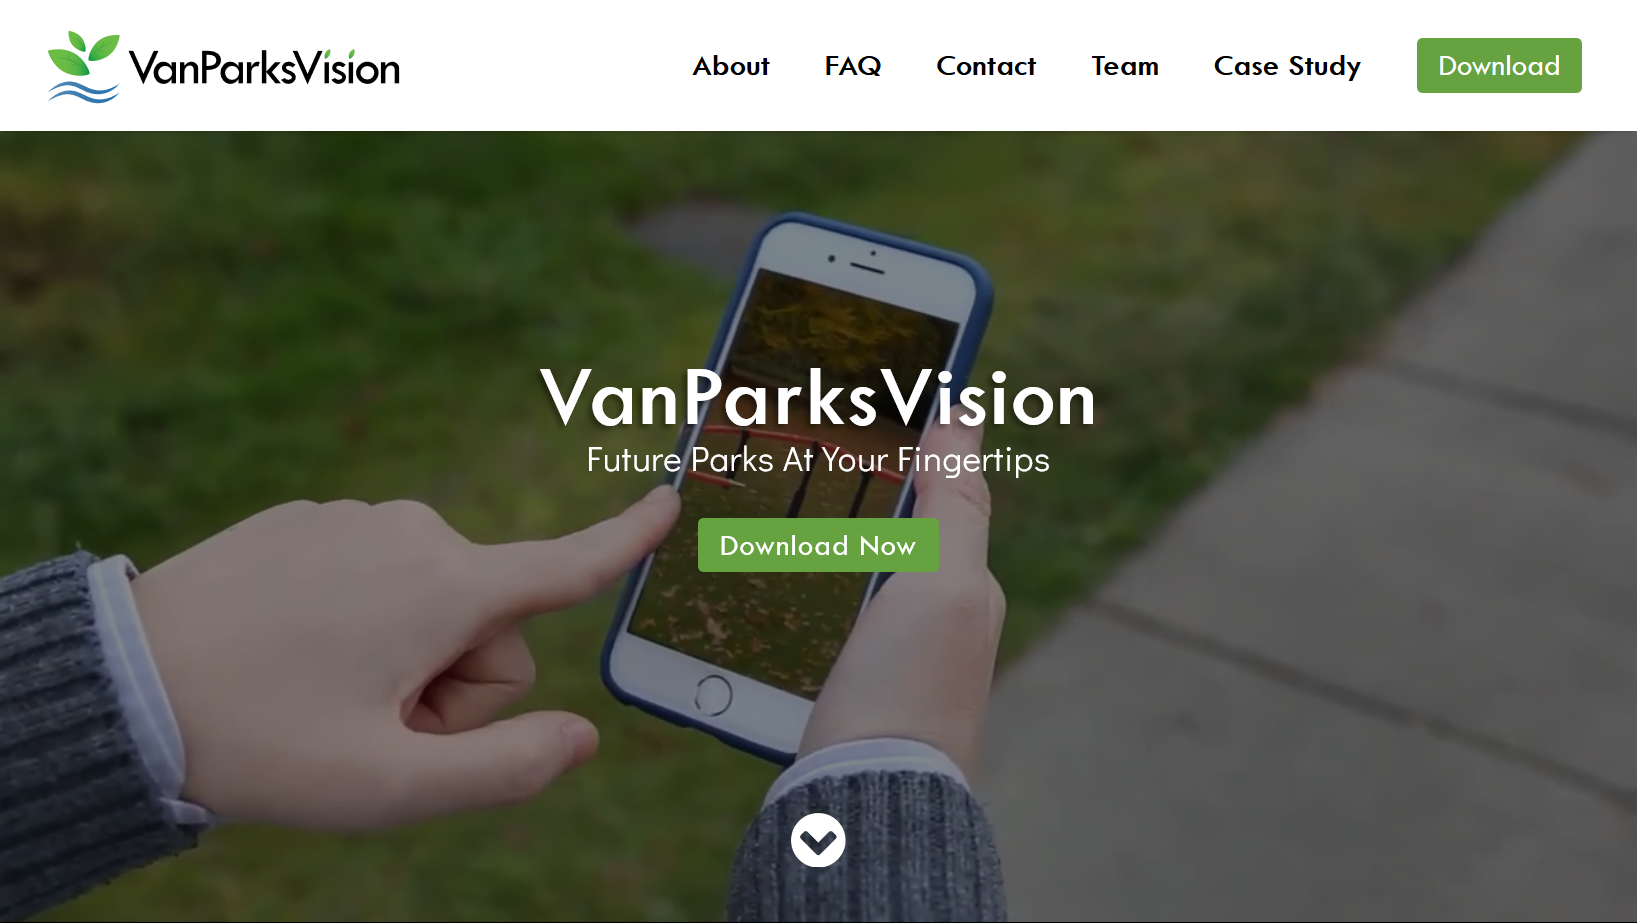 The logo for the VanParksVision project.